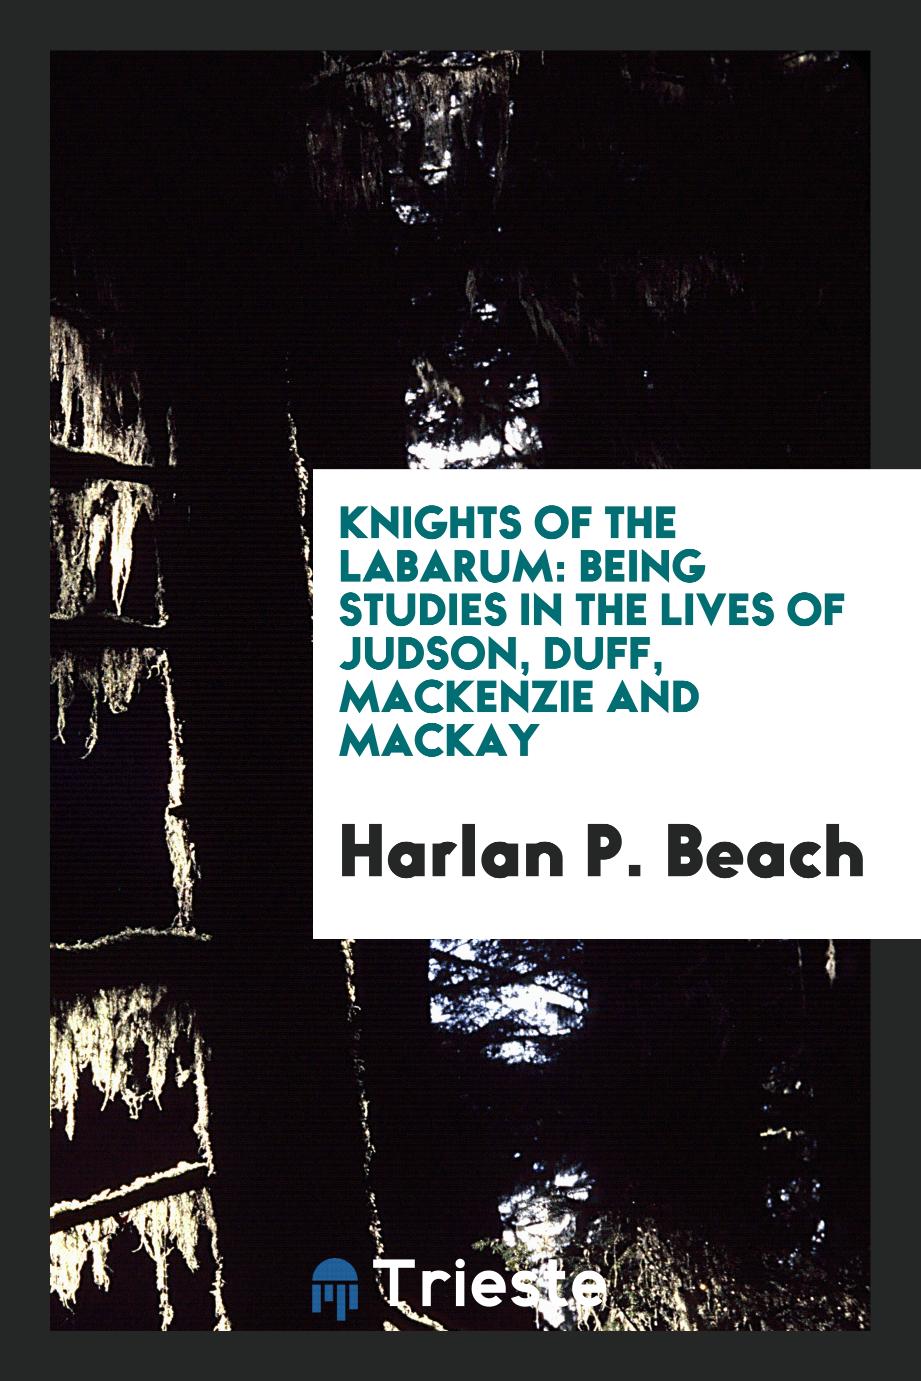 Knights of the Labarum: Being Studies in the Lives of Judson, Duff, Mackenzie and Mackay